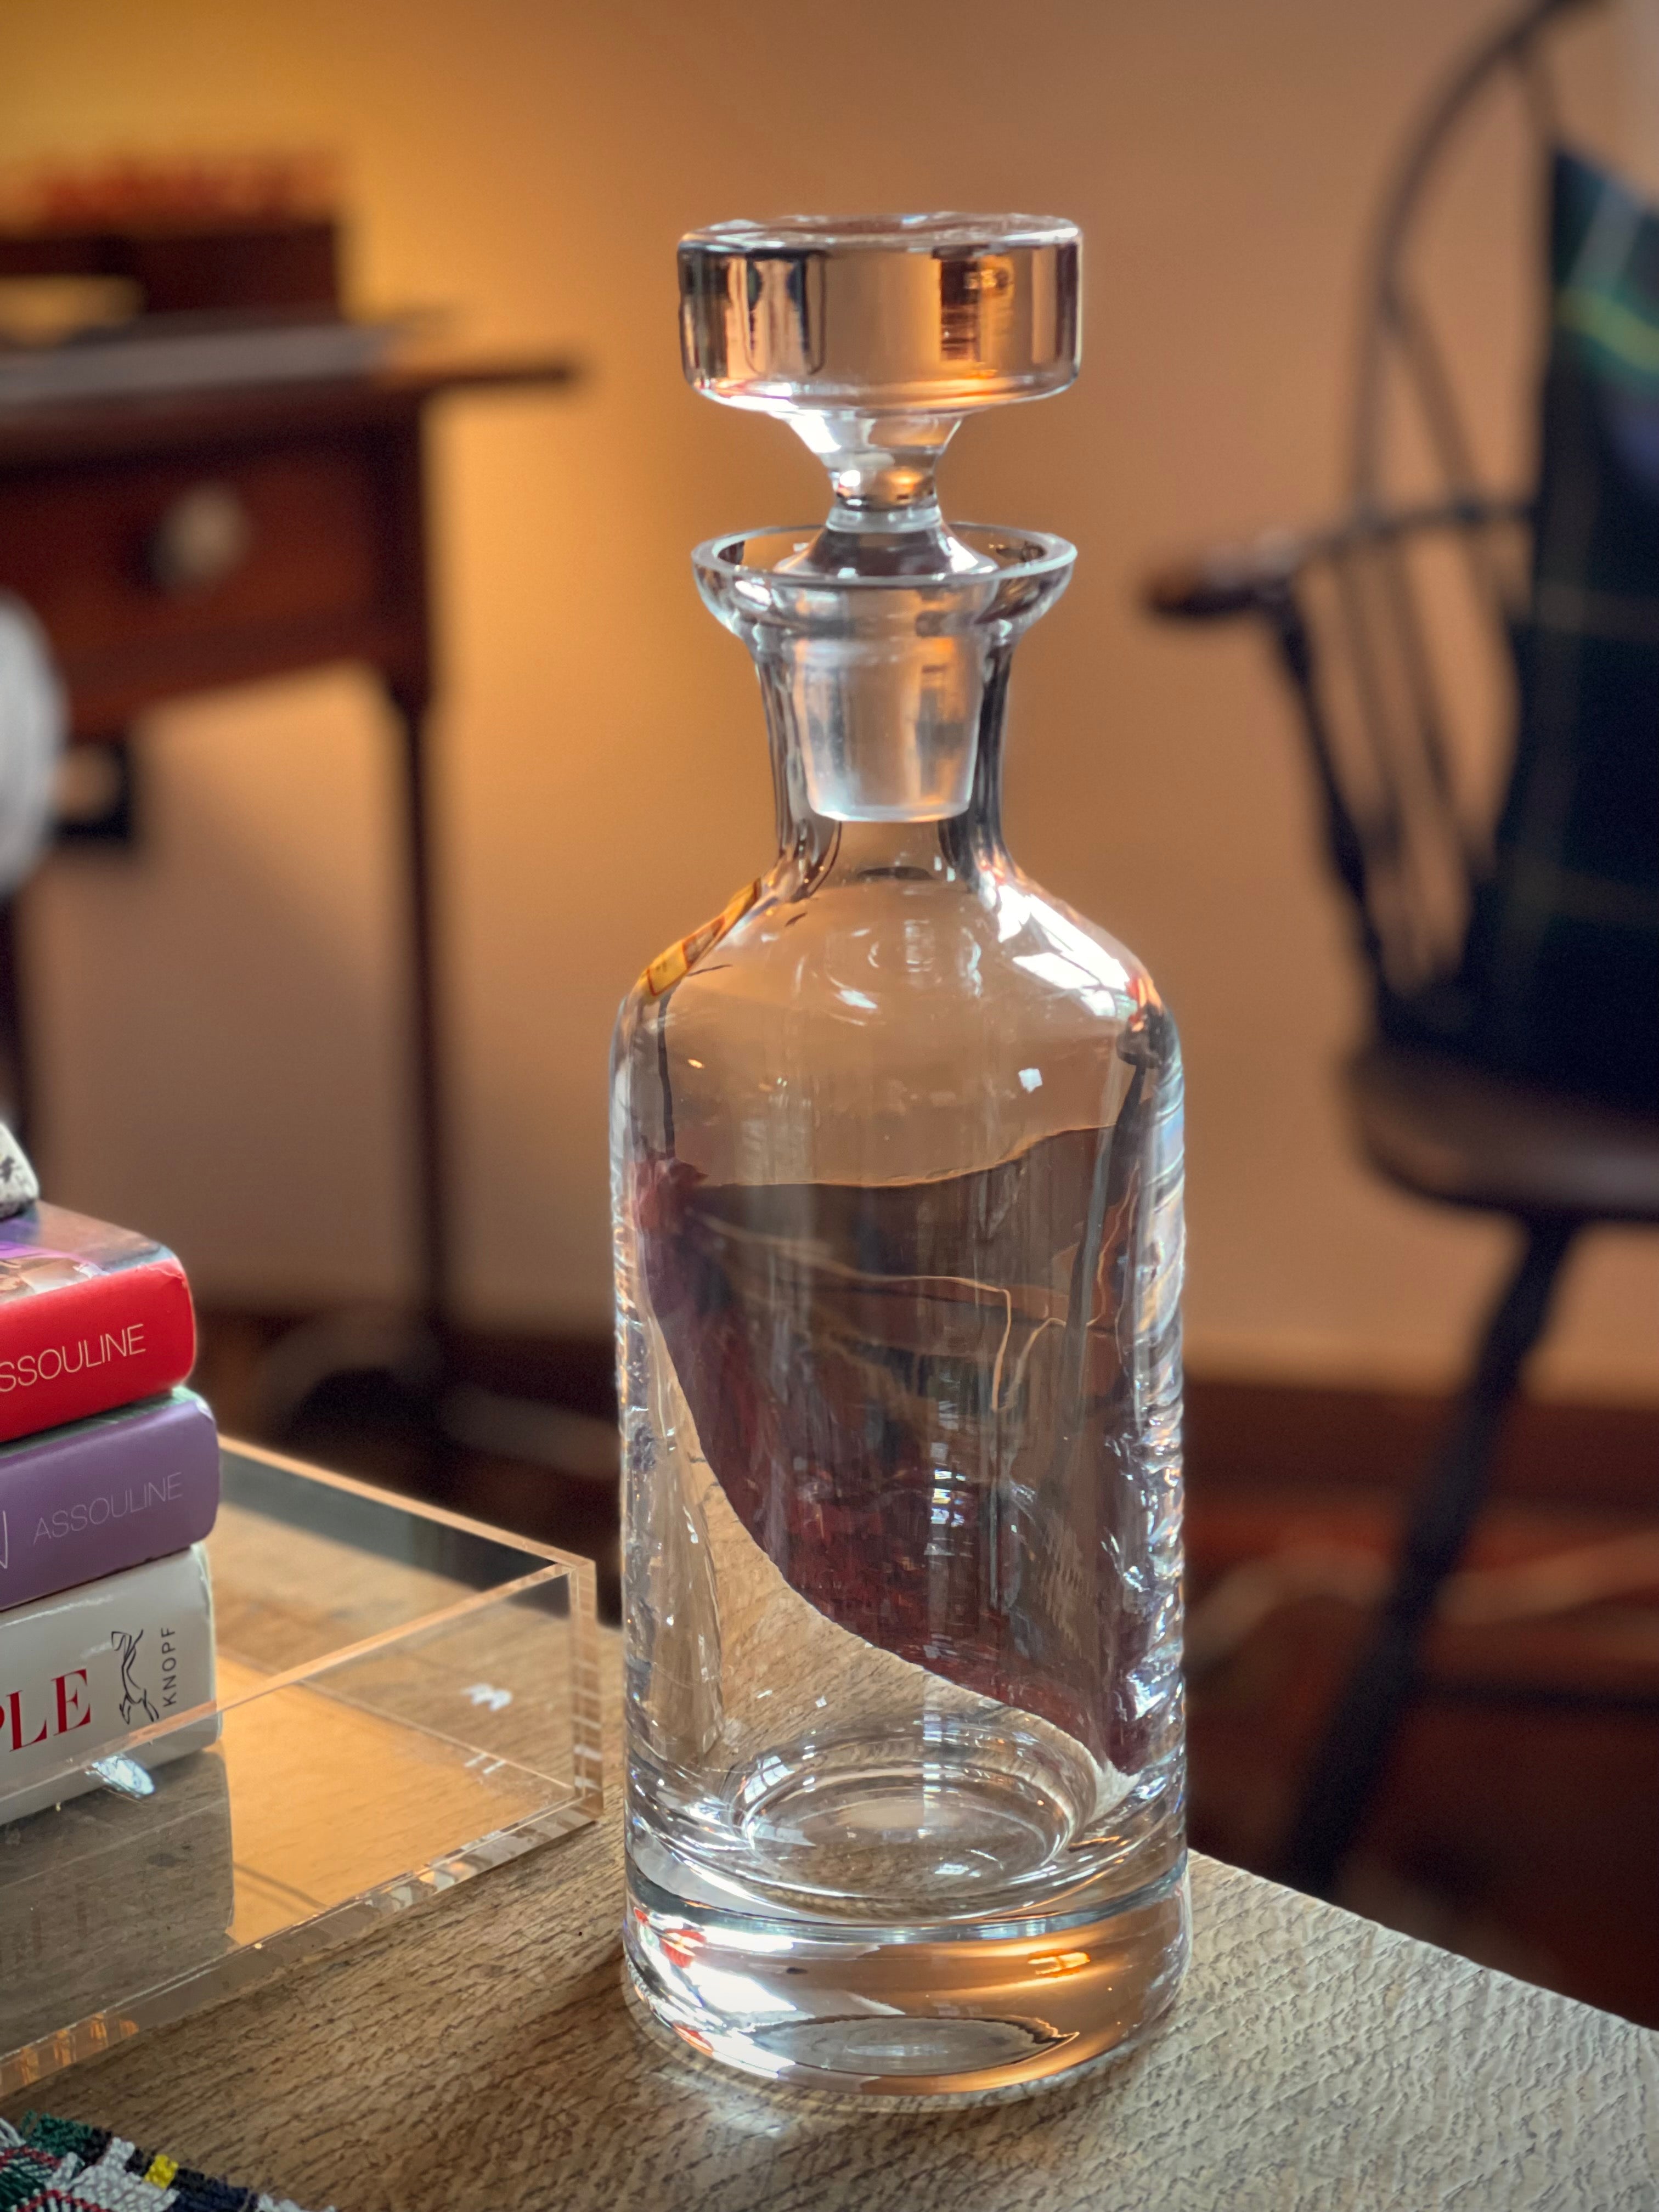 Lead-Free Crystal Decanters - Multiple Sizes